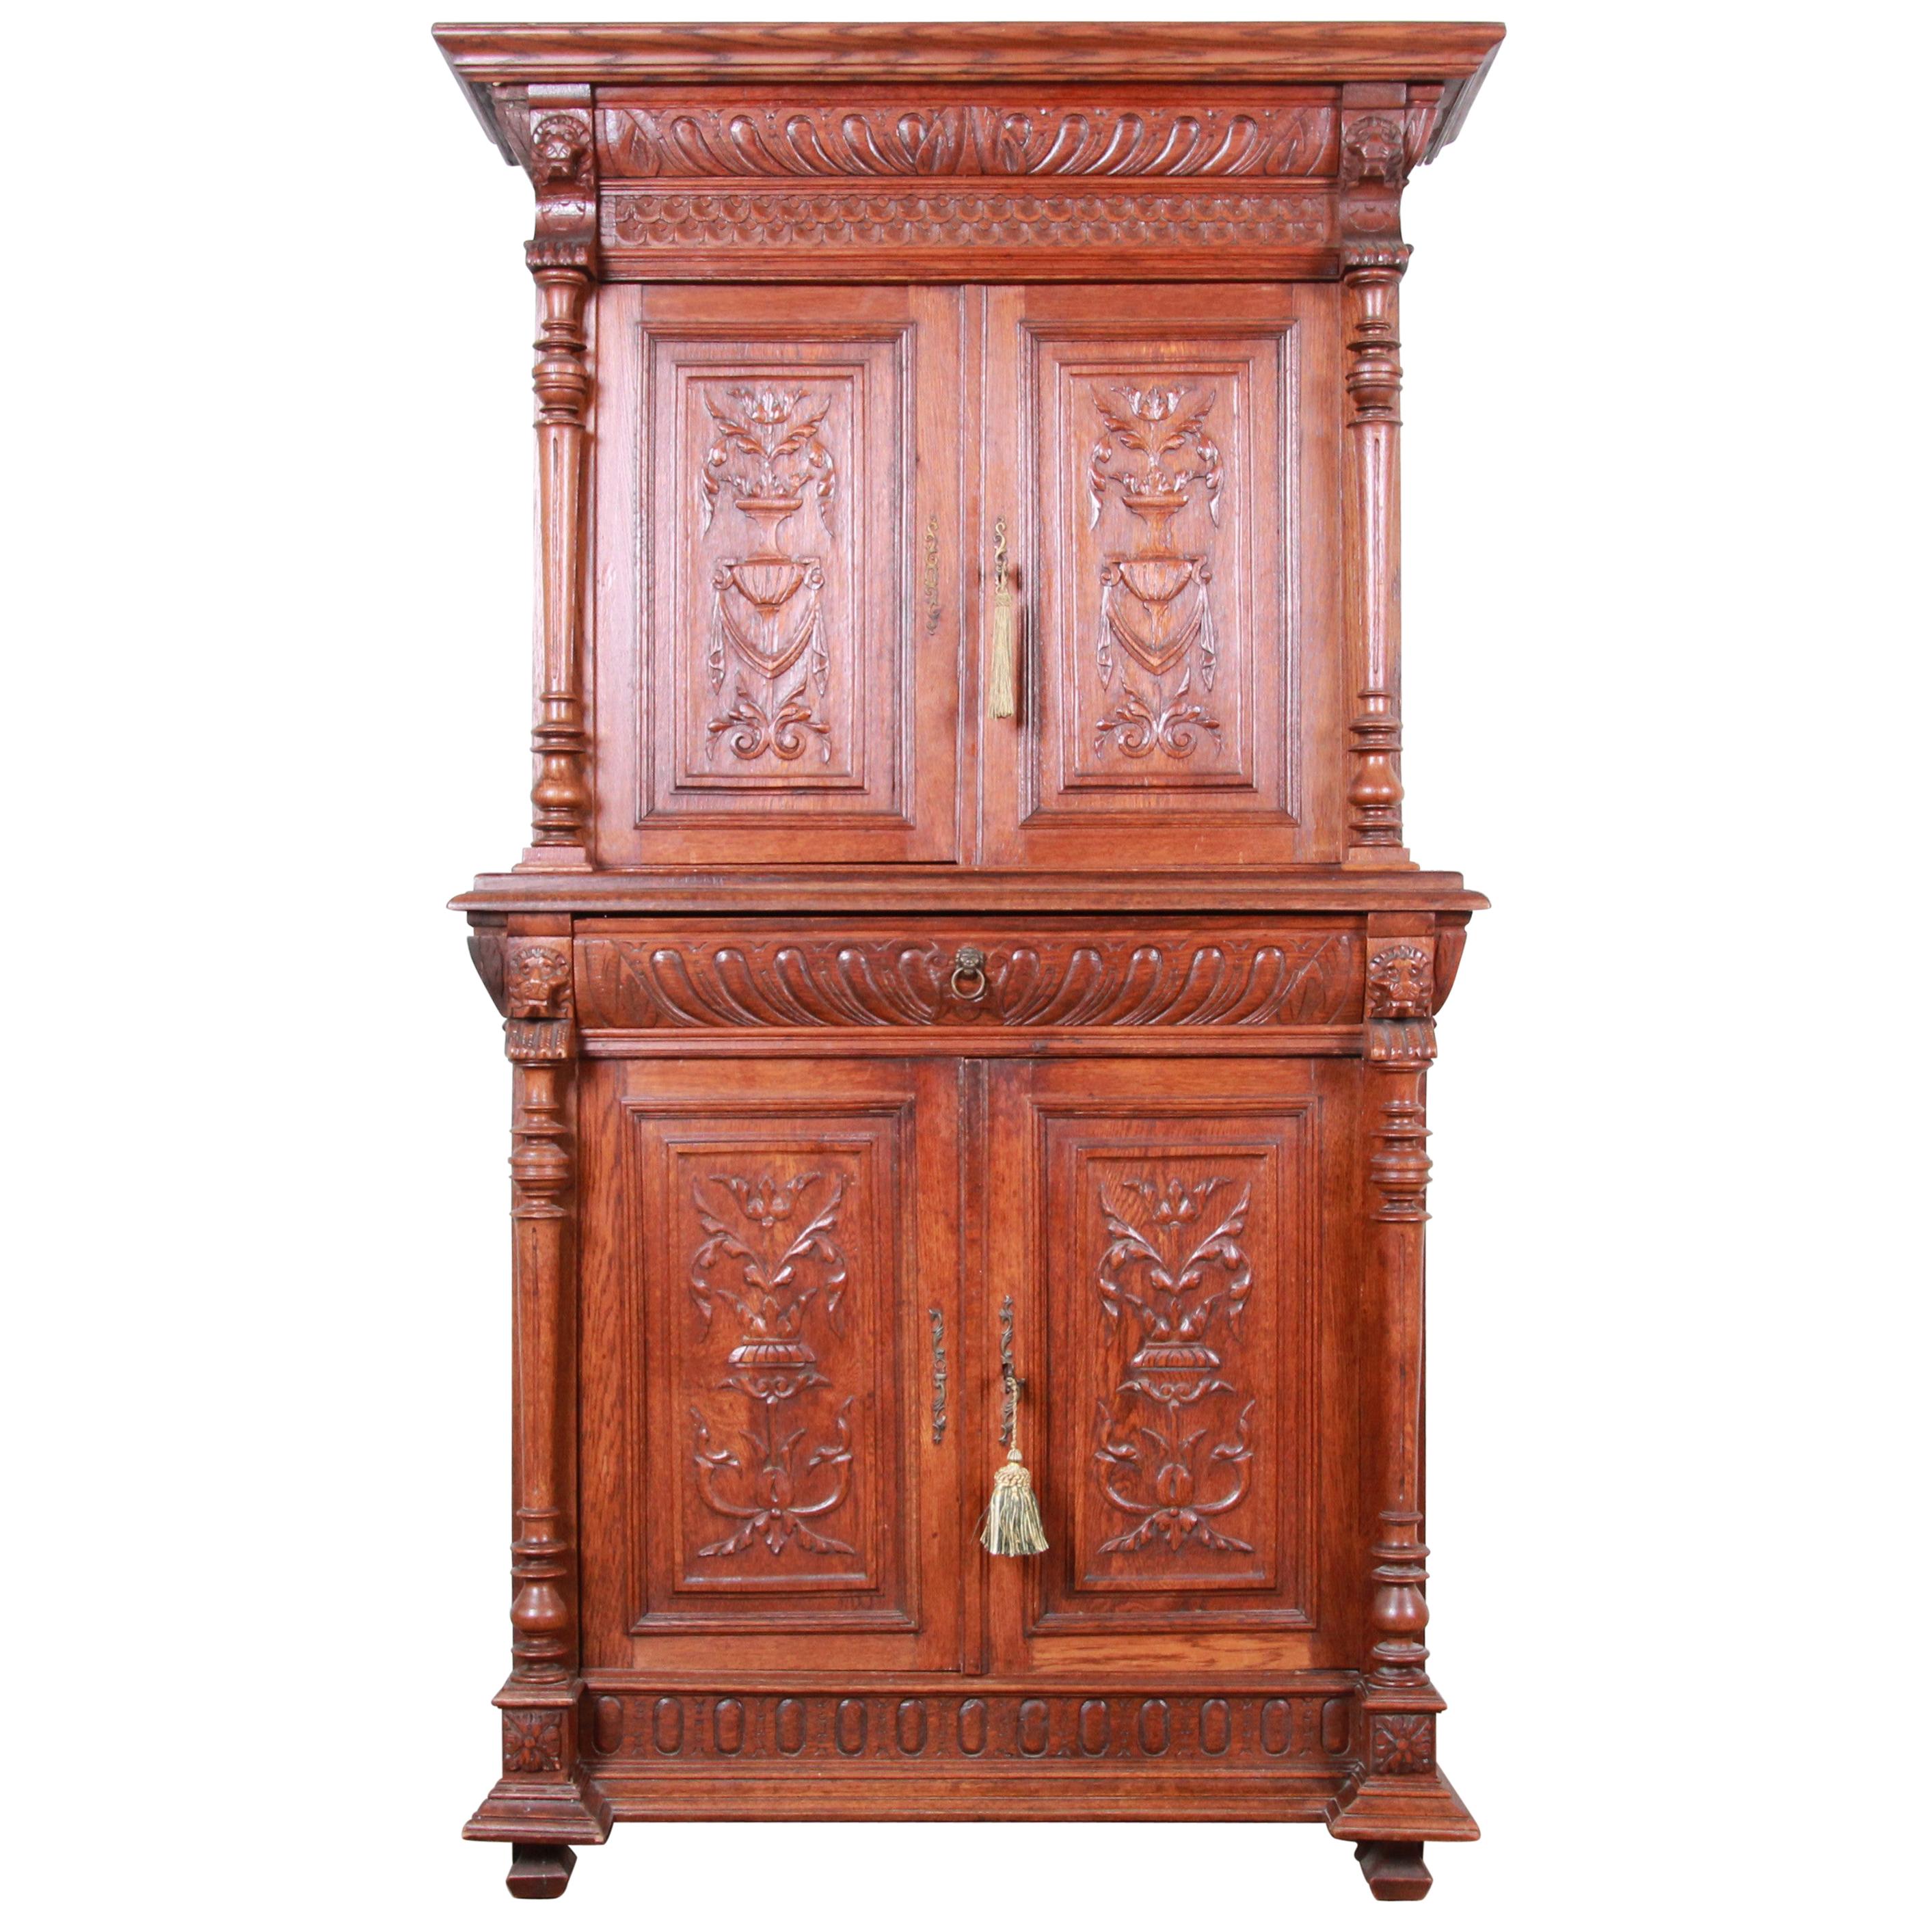 Ornate Carved Oak French Sideboard Bar Cabinet with Lion Figures, circa 1900